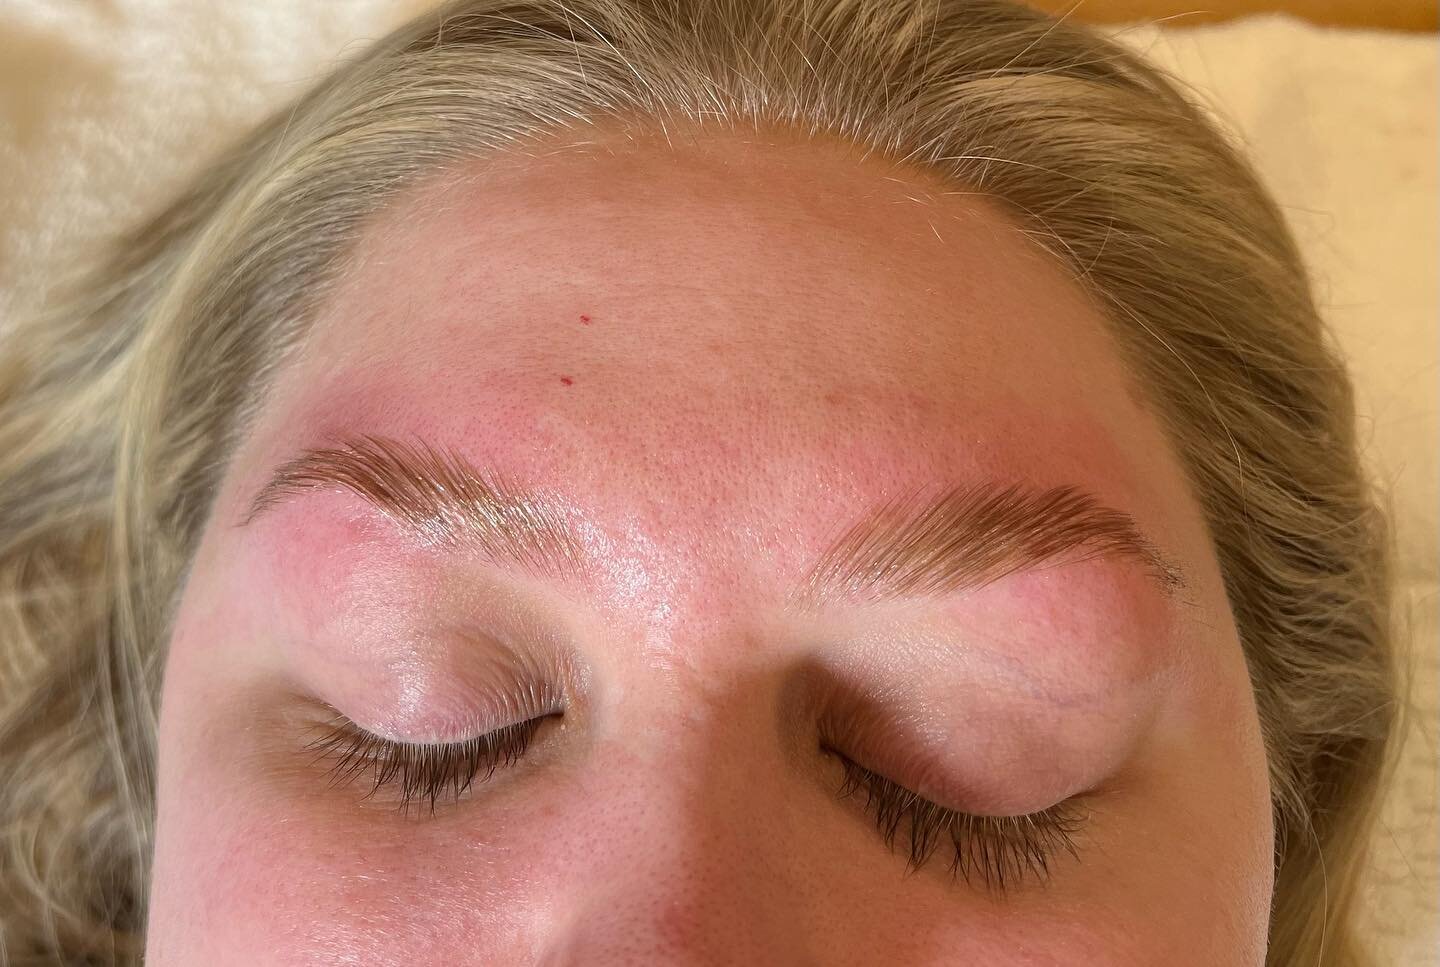 Brow lamination + a wax 👏🏼🫶🏼
Swipe for before &gt;&gt; 
&bull;
&bull;
&bull;
#brow #brows #browlamination #eyebrowsonfleek #wax #waxing #waxing specialist #beforeandafter #esthetician #browshape #tint #browtint